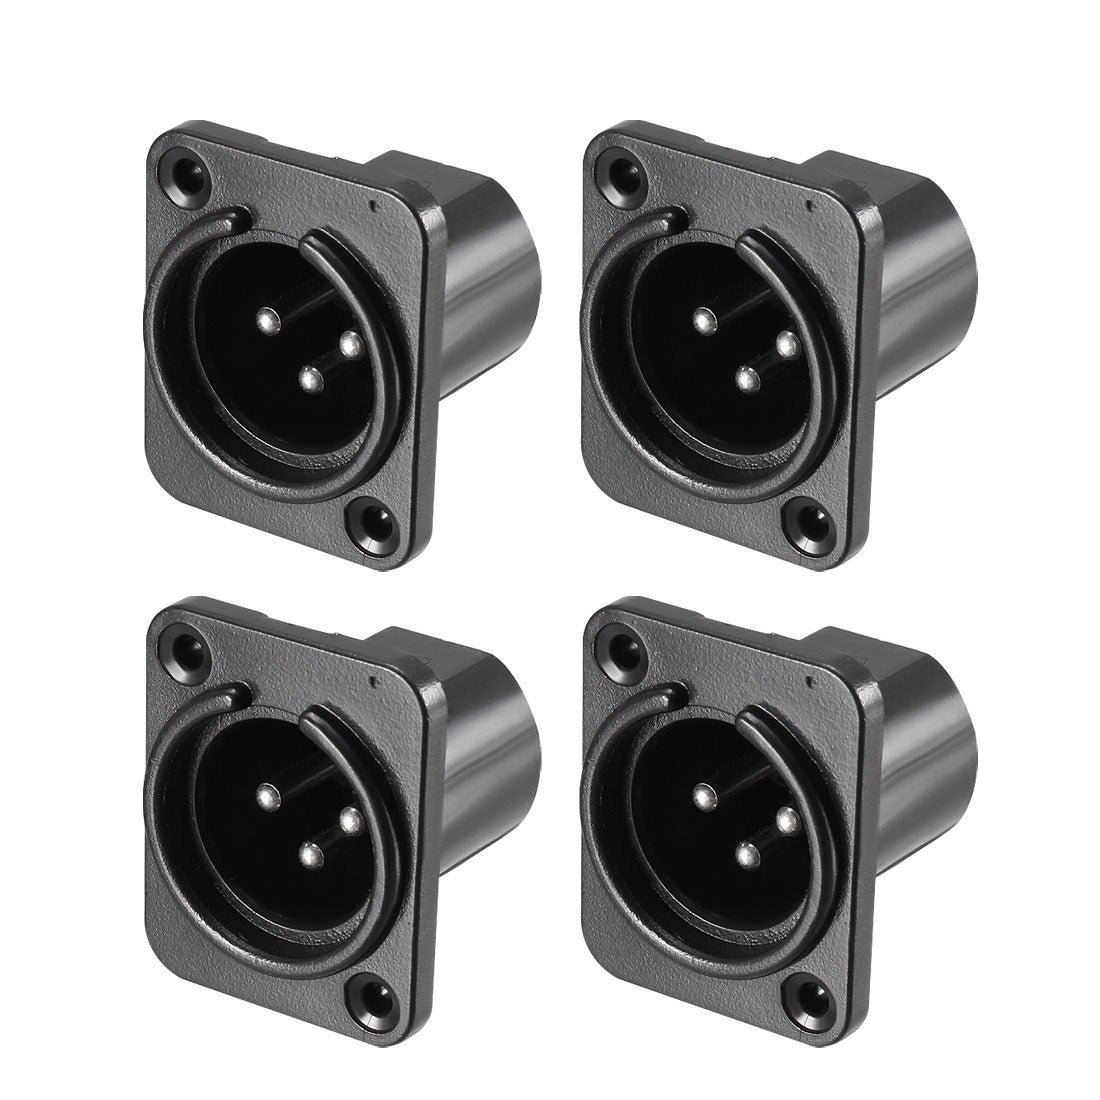 uxcell Uxcell YL3059 3-Pin XLR Male Jack Panel Mount For Microphone Connector Adapter Converter Audio Speaker Twist Lock 4Pcs